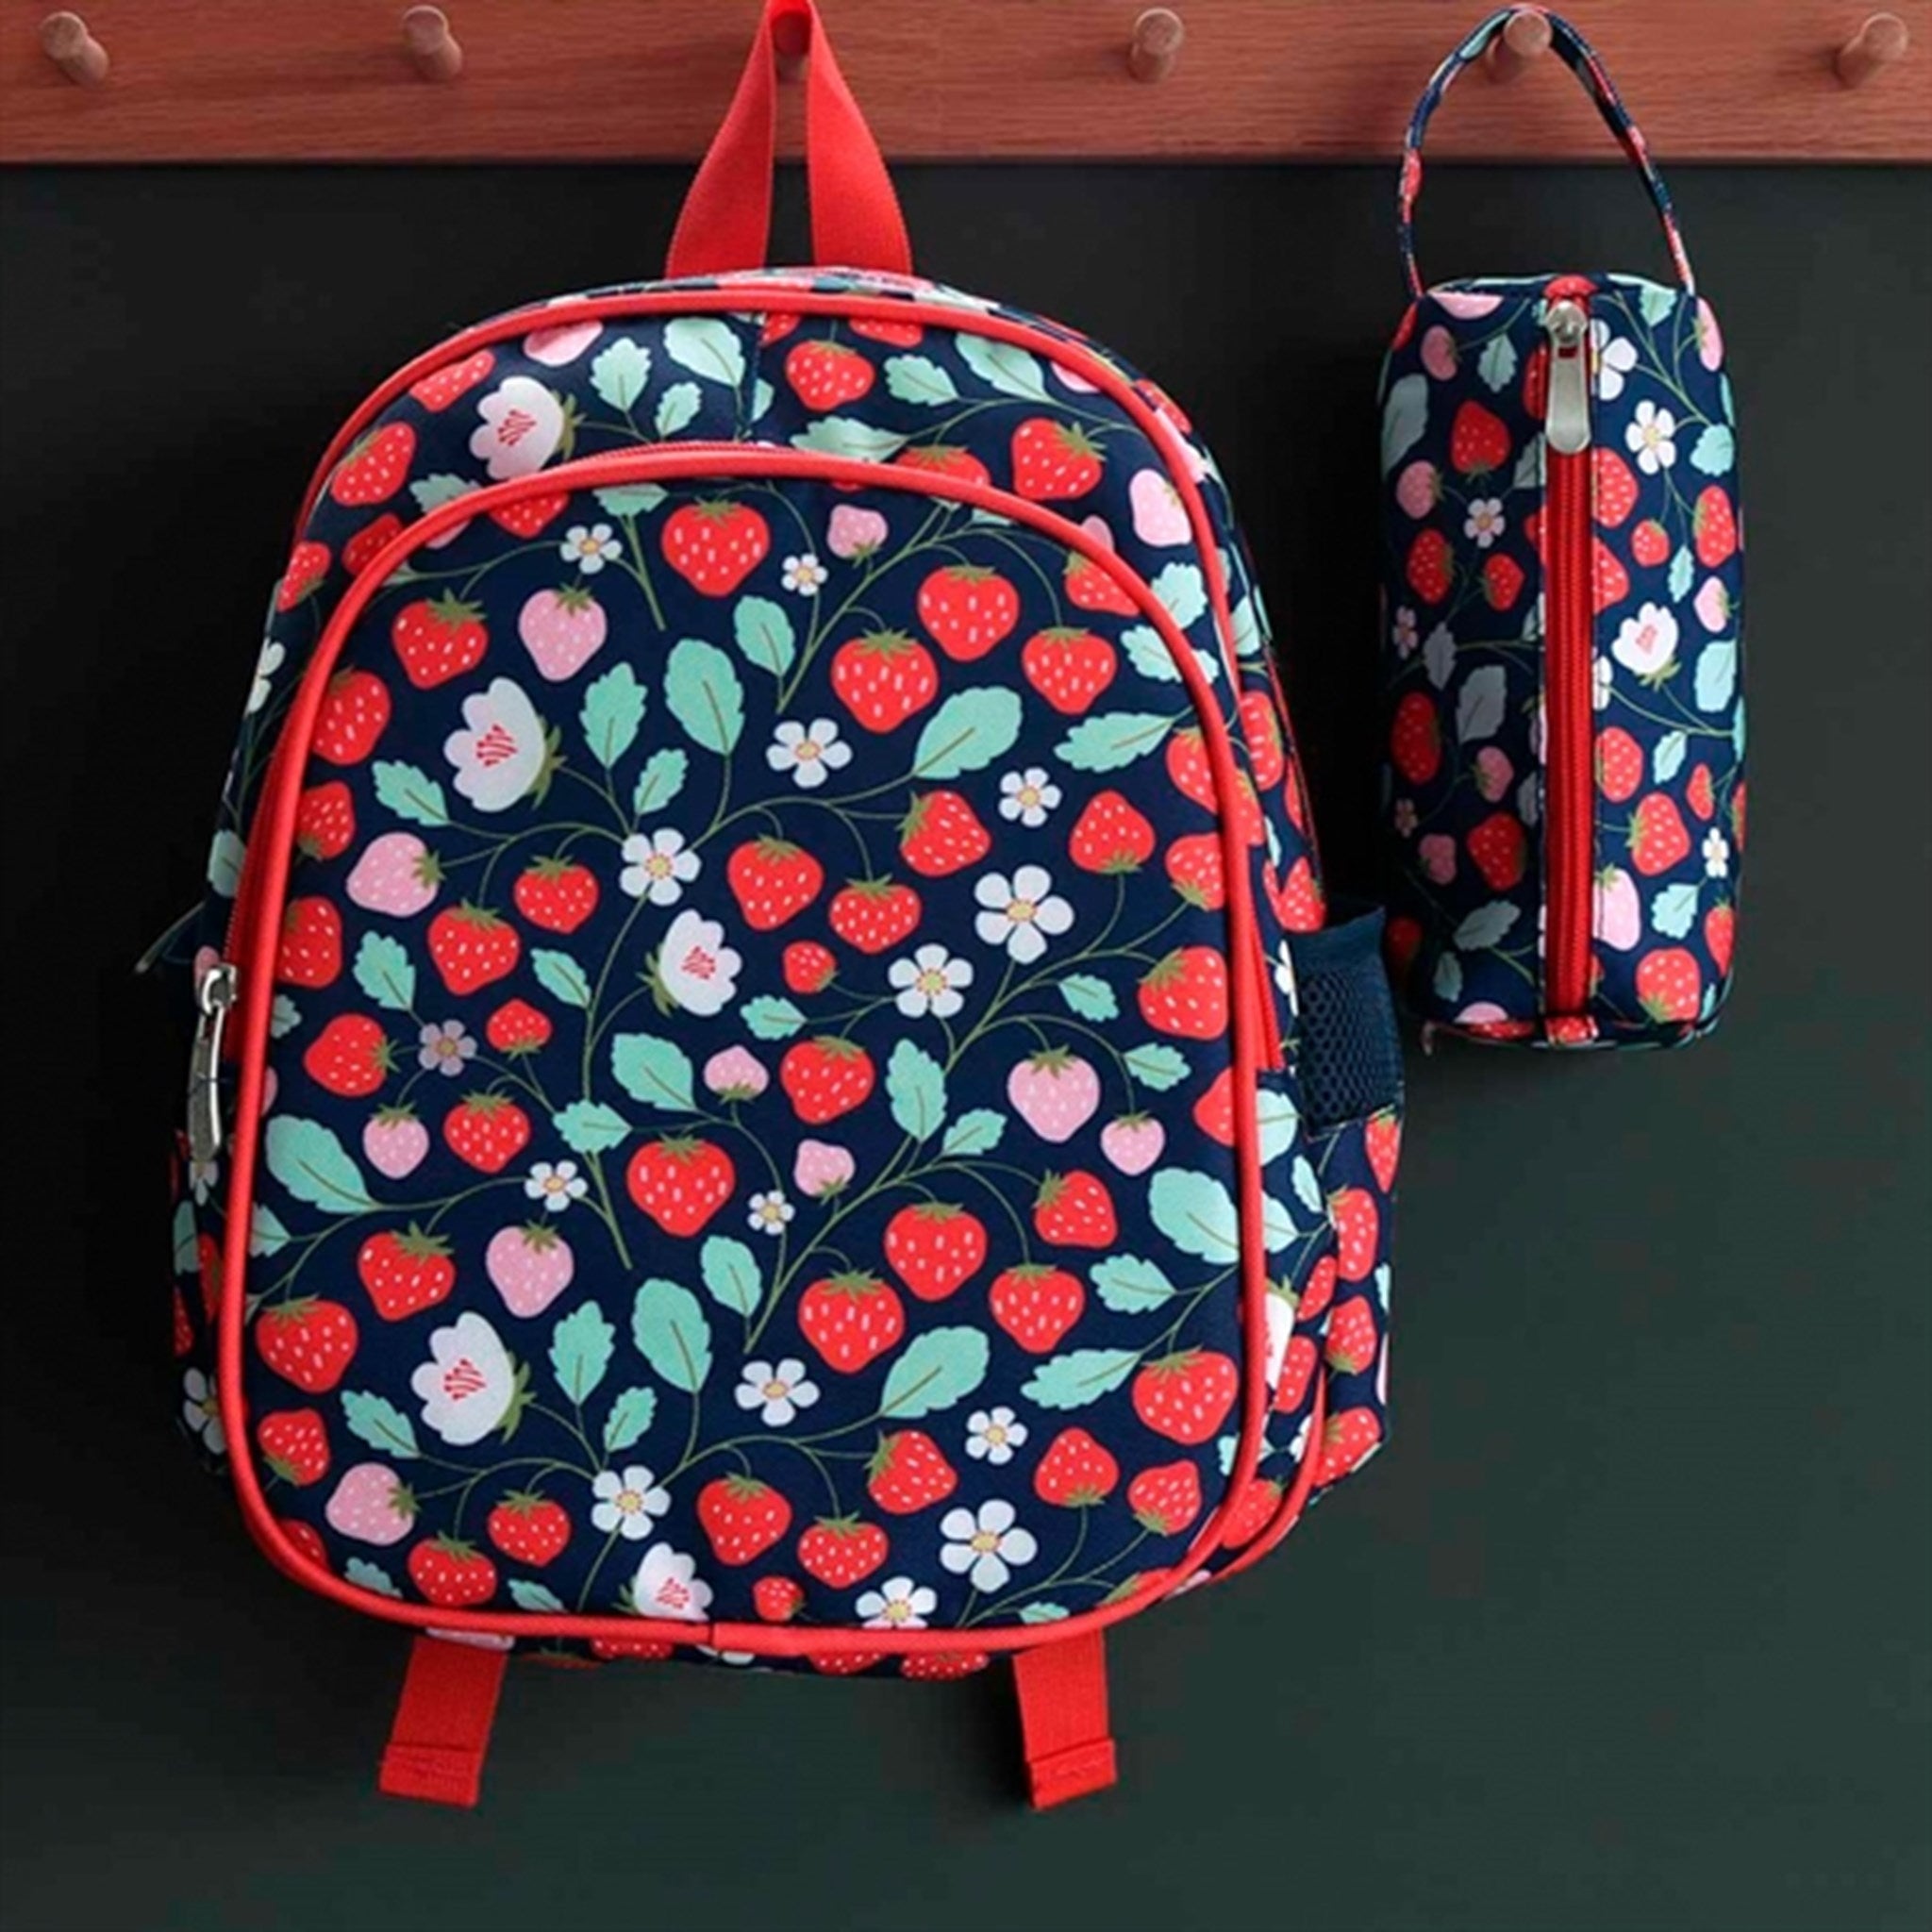 A Little Lovely Company Backpack Strawberries 2